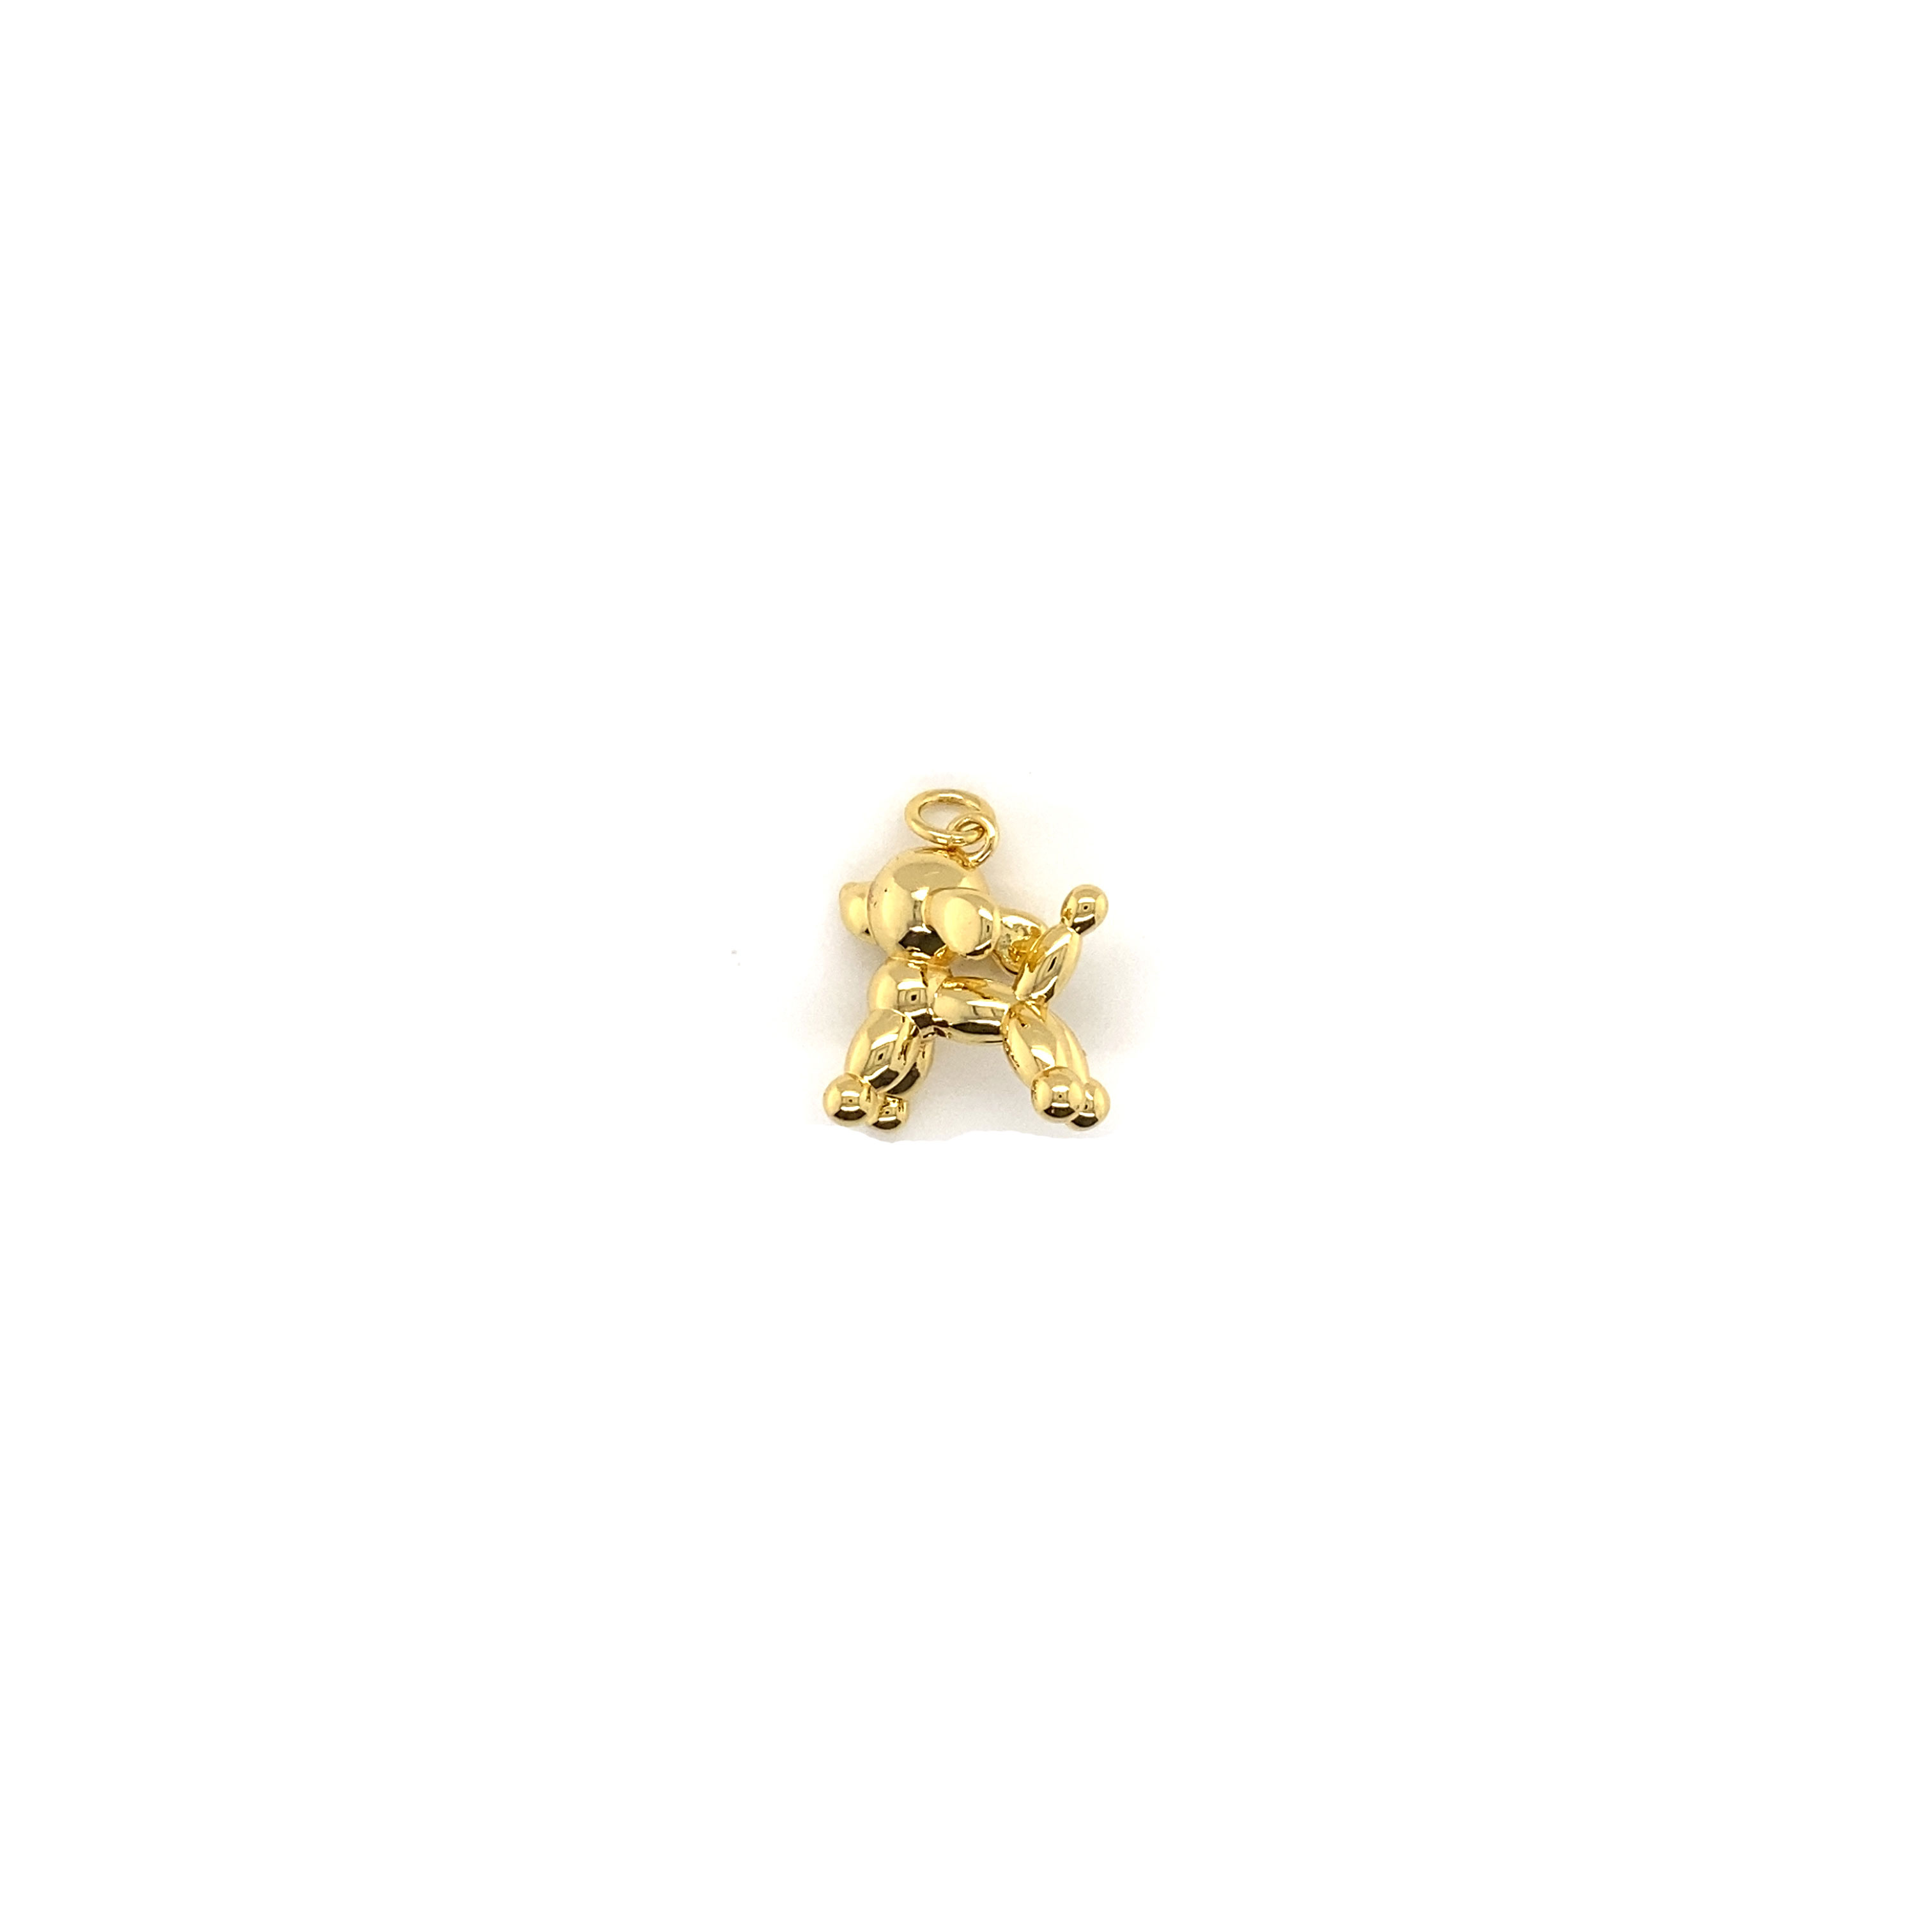 3D Poodle Charm - Gold Plated